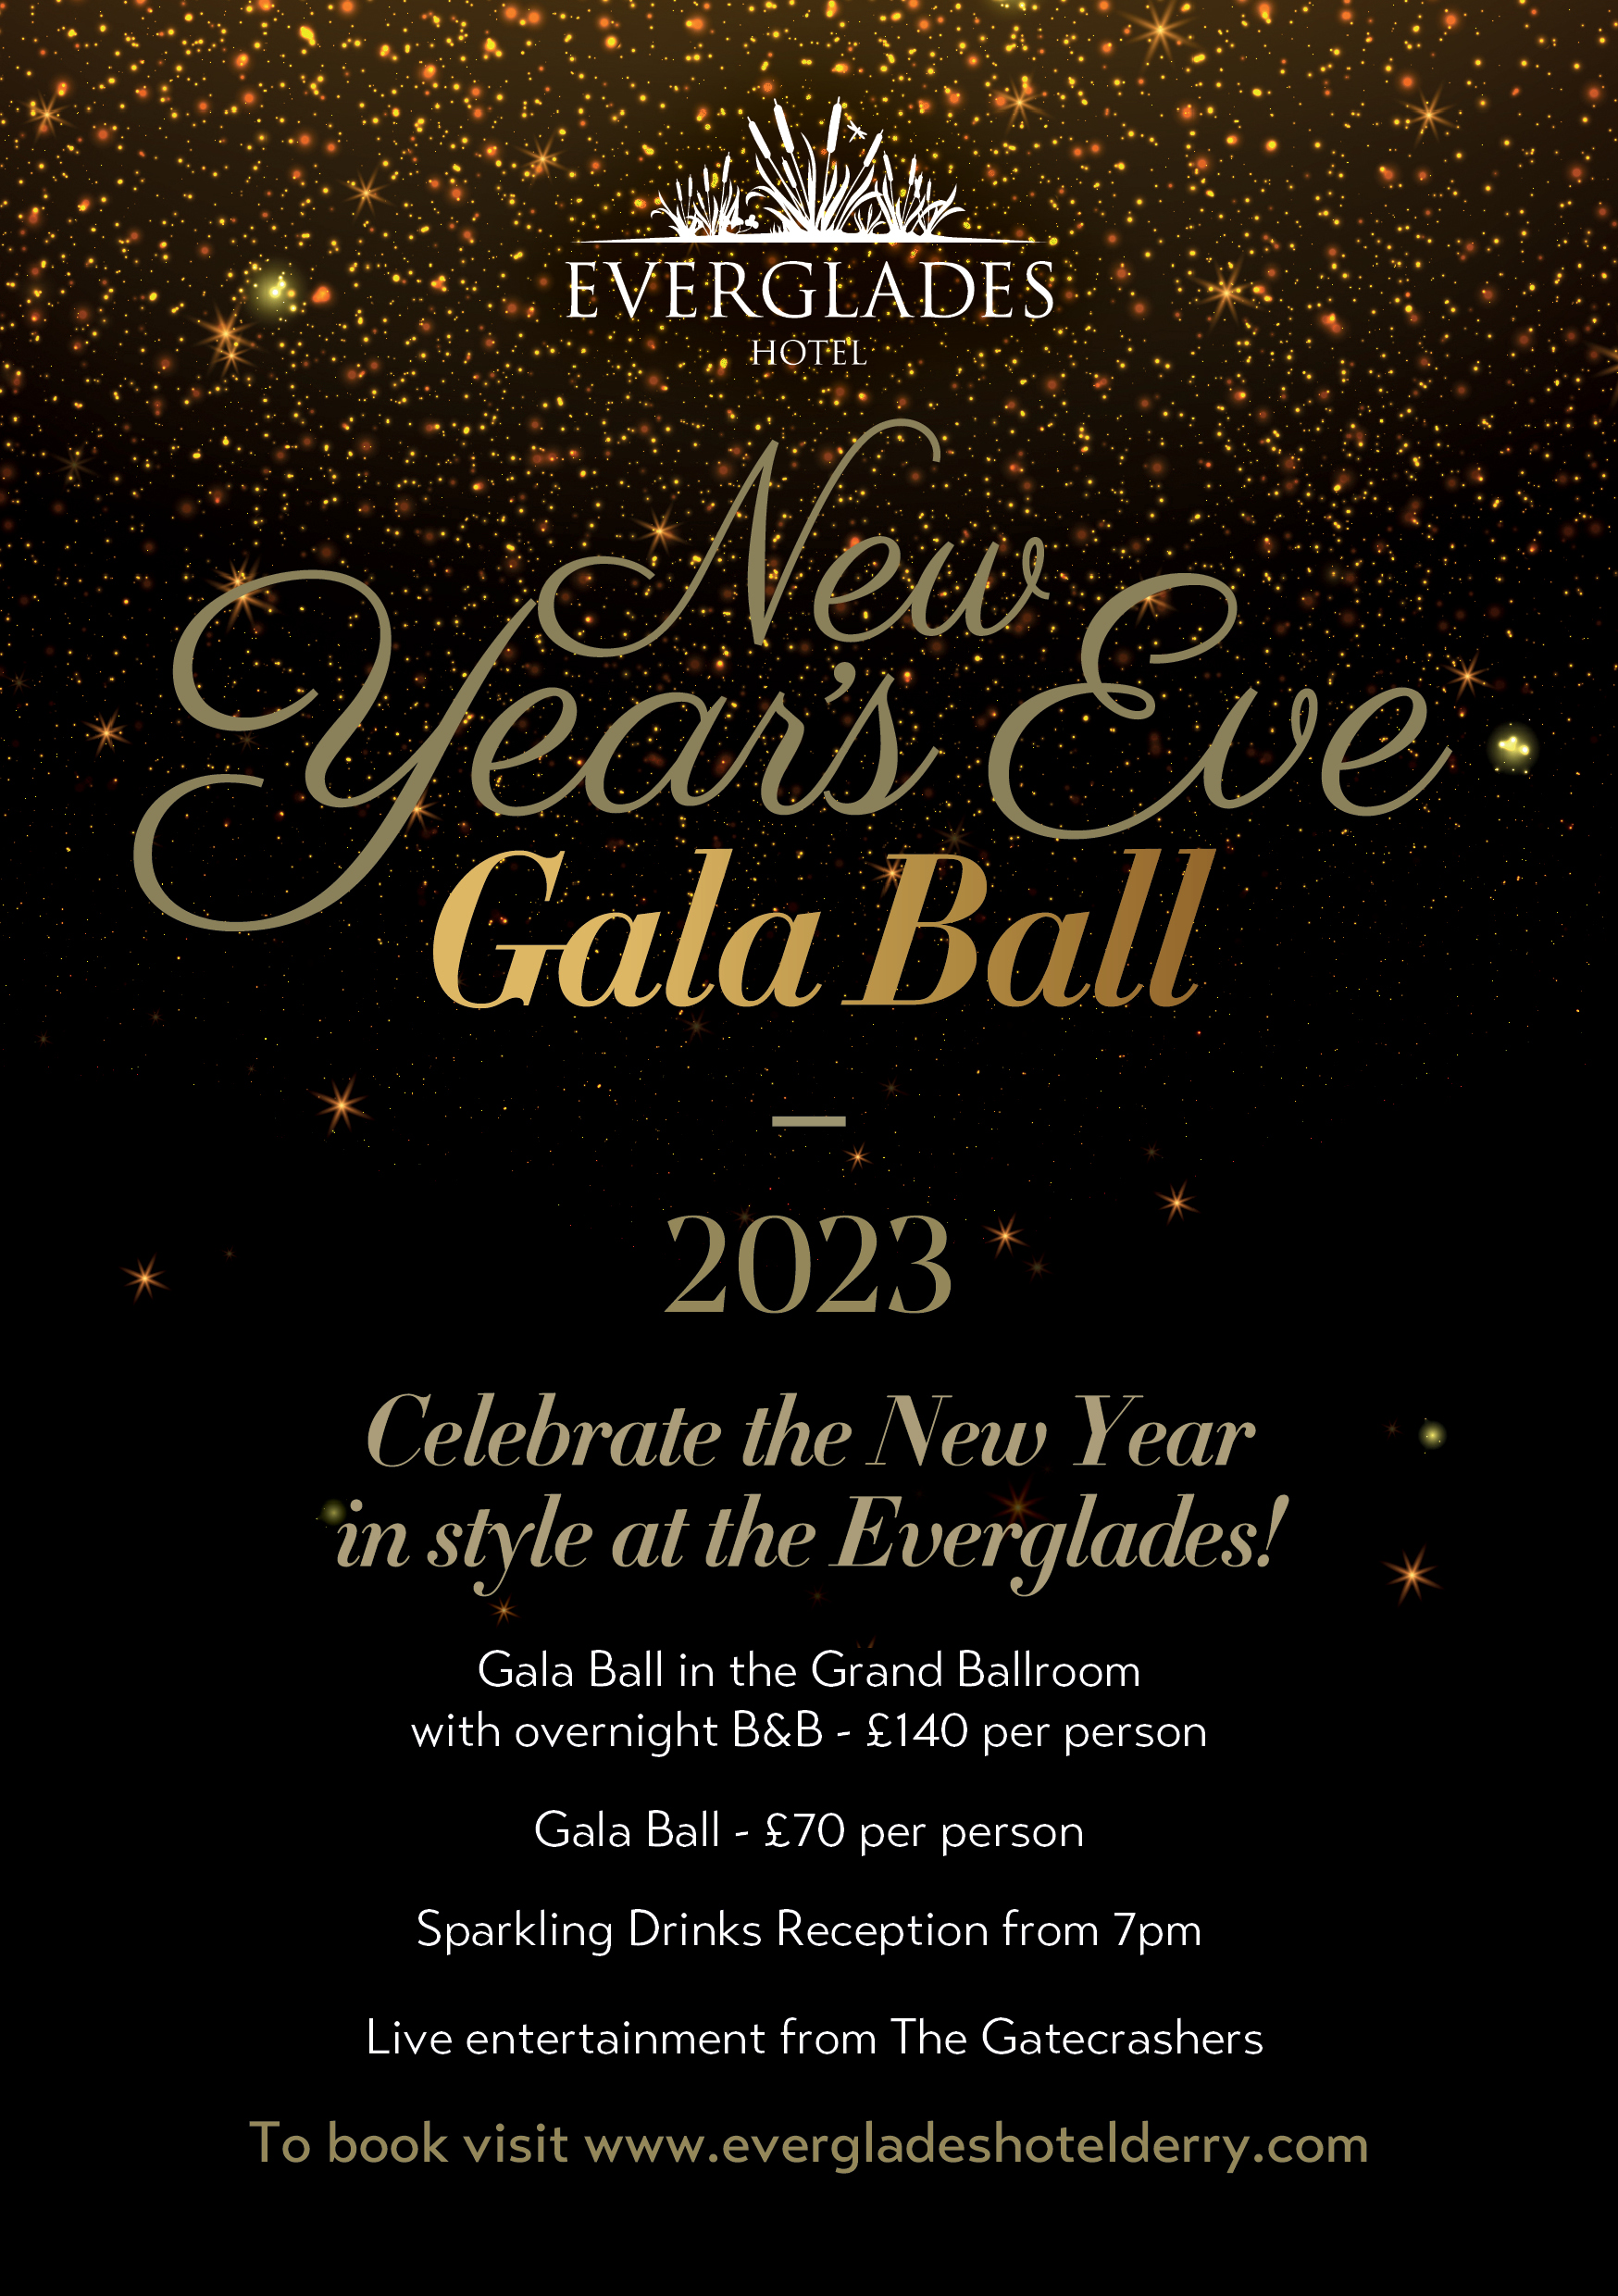 NEW YEAR'S EVE GALA BALL AT THE EVERGLADES HOTEL